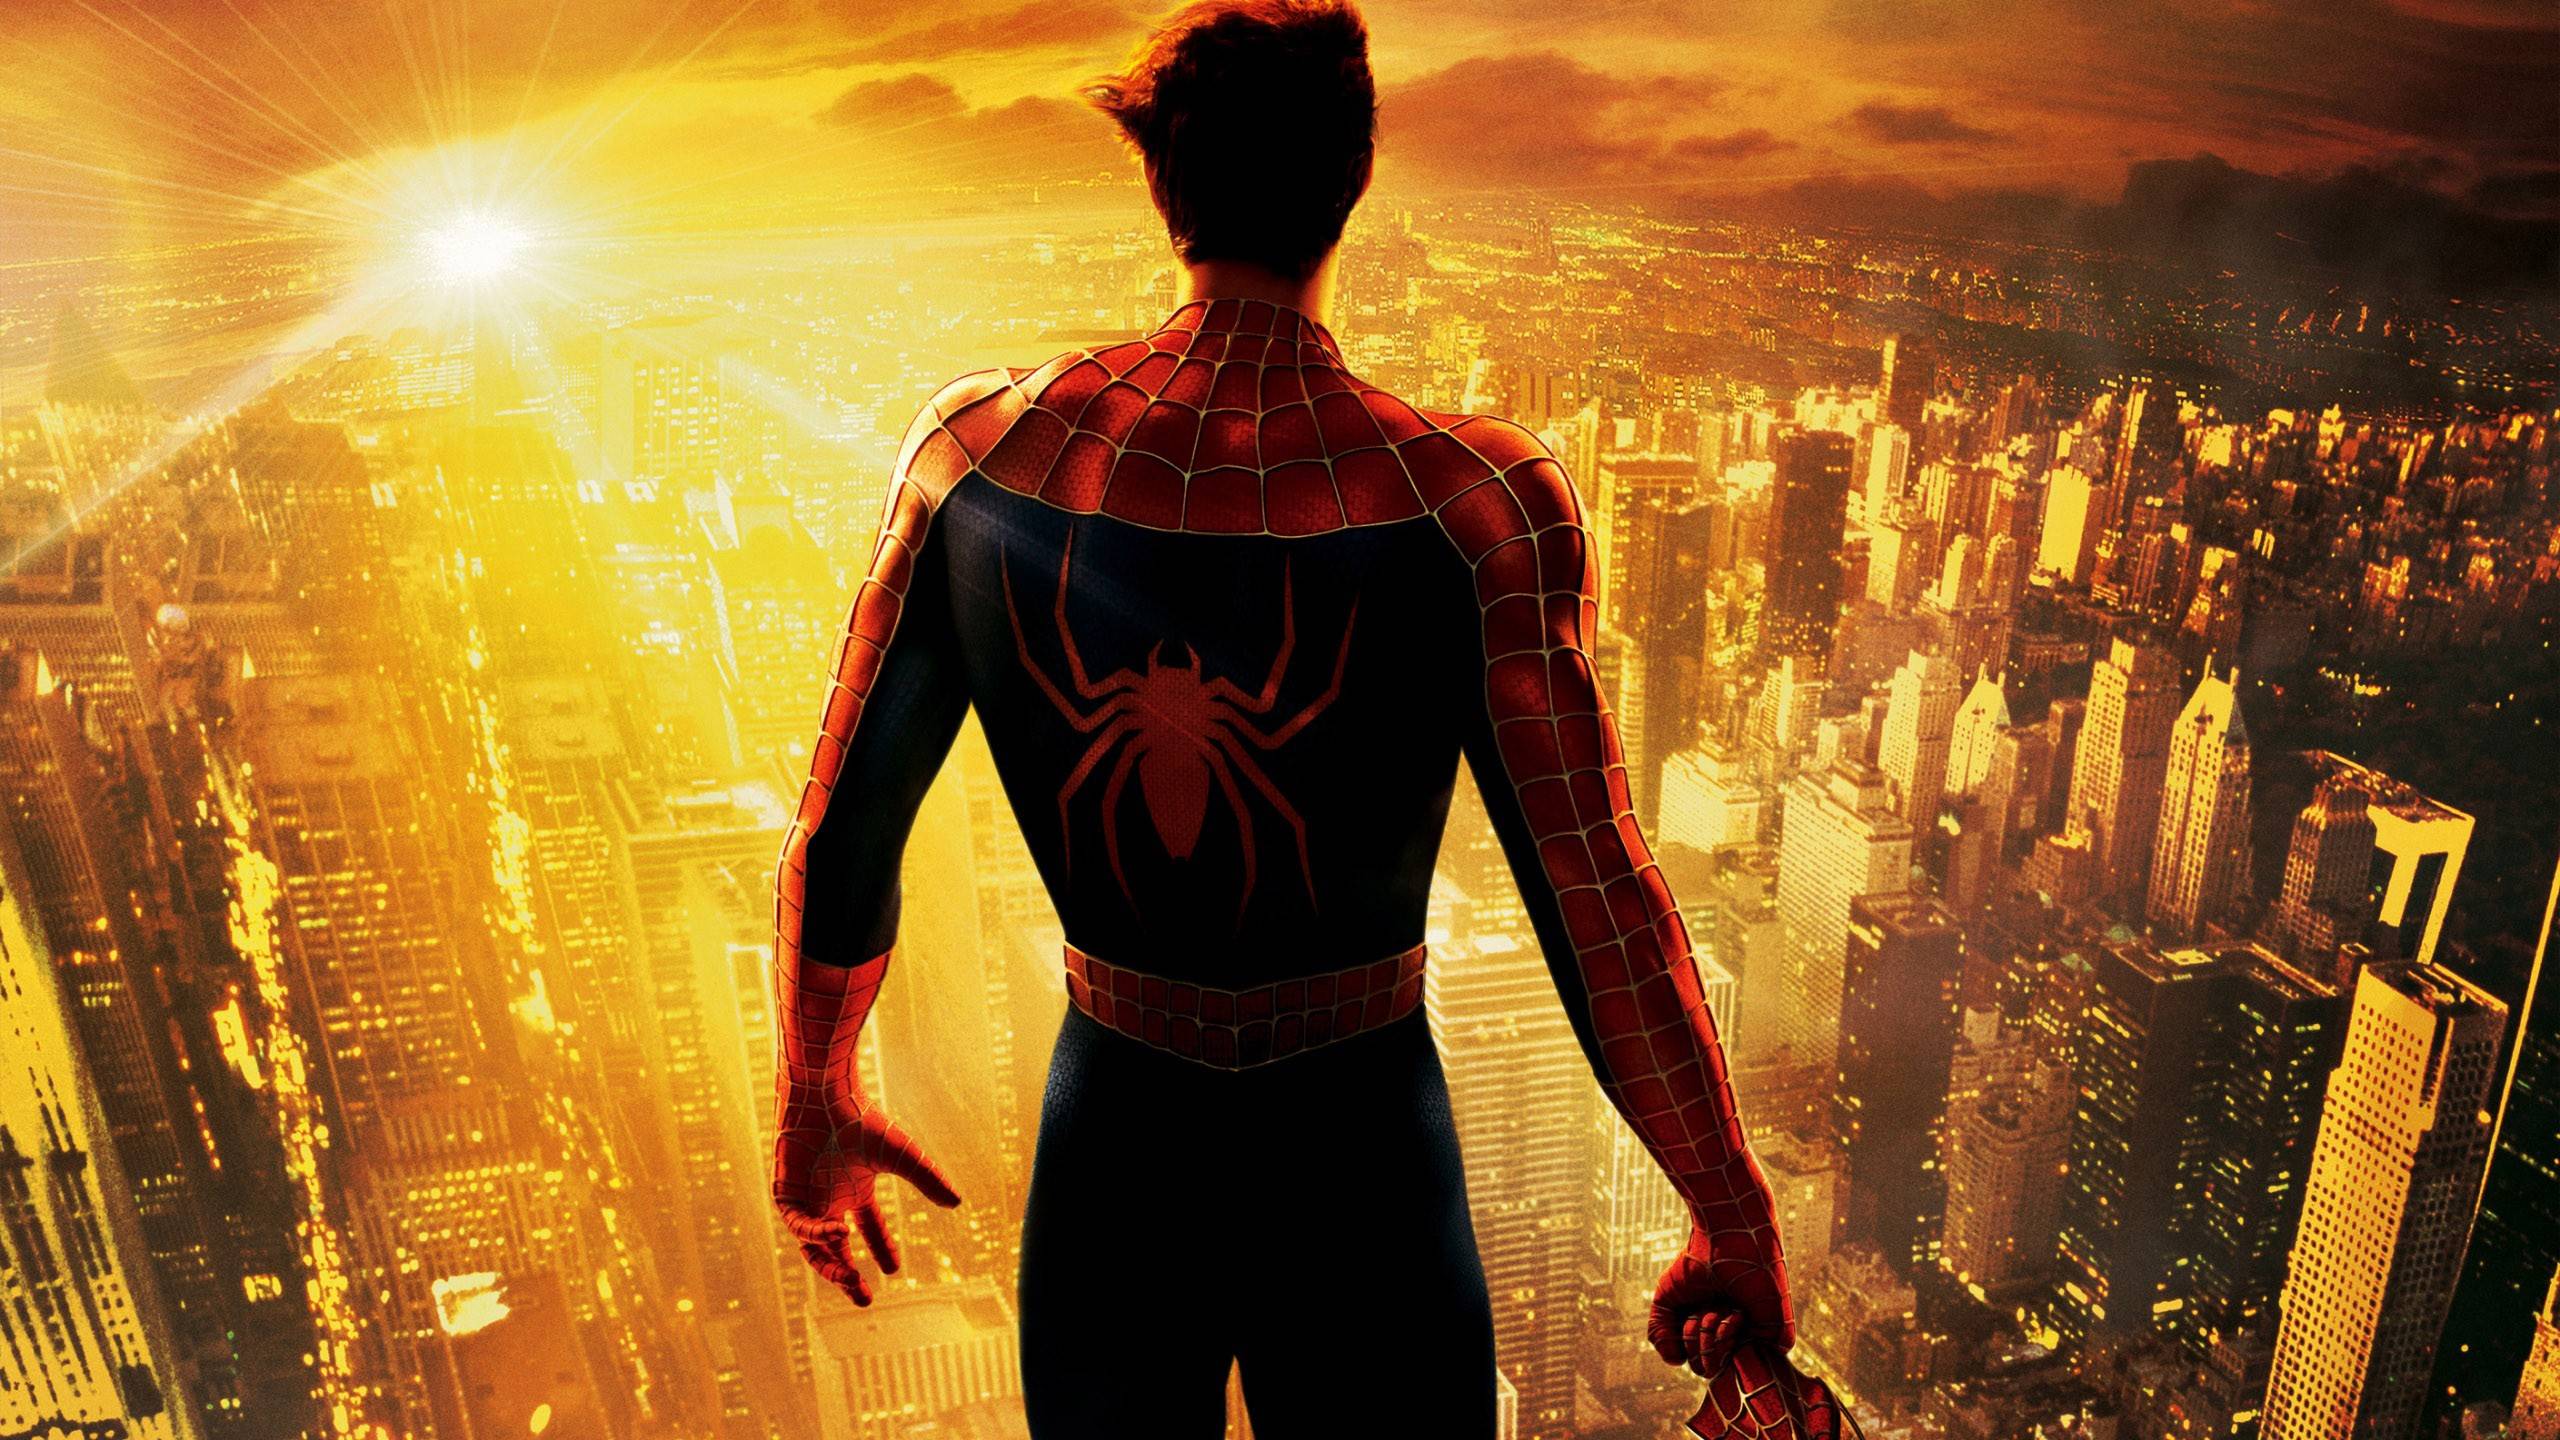 SpiderMan Look Over City Wallpaper Wide or HD